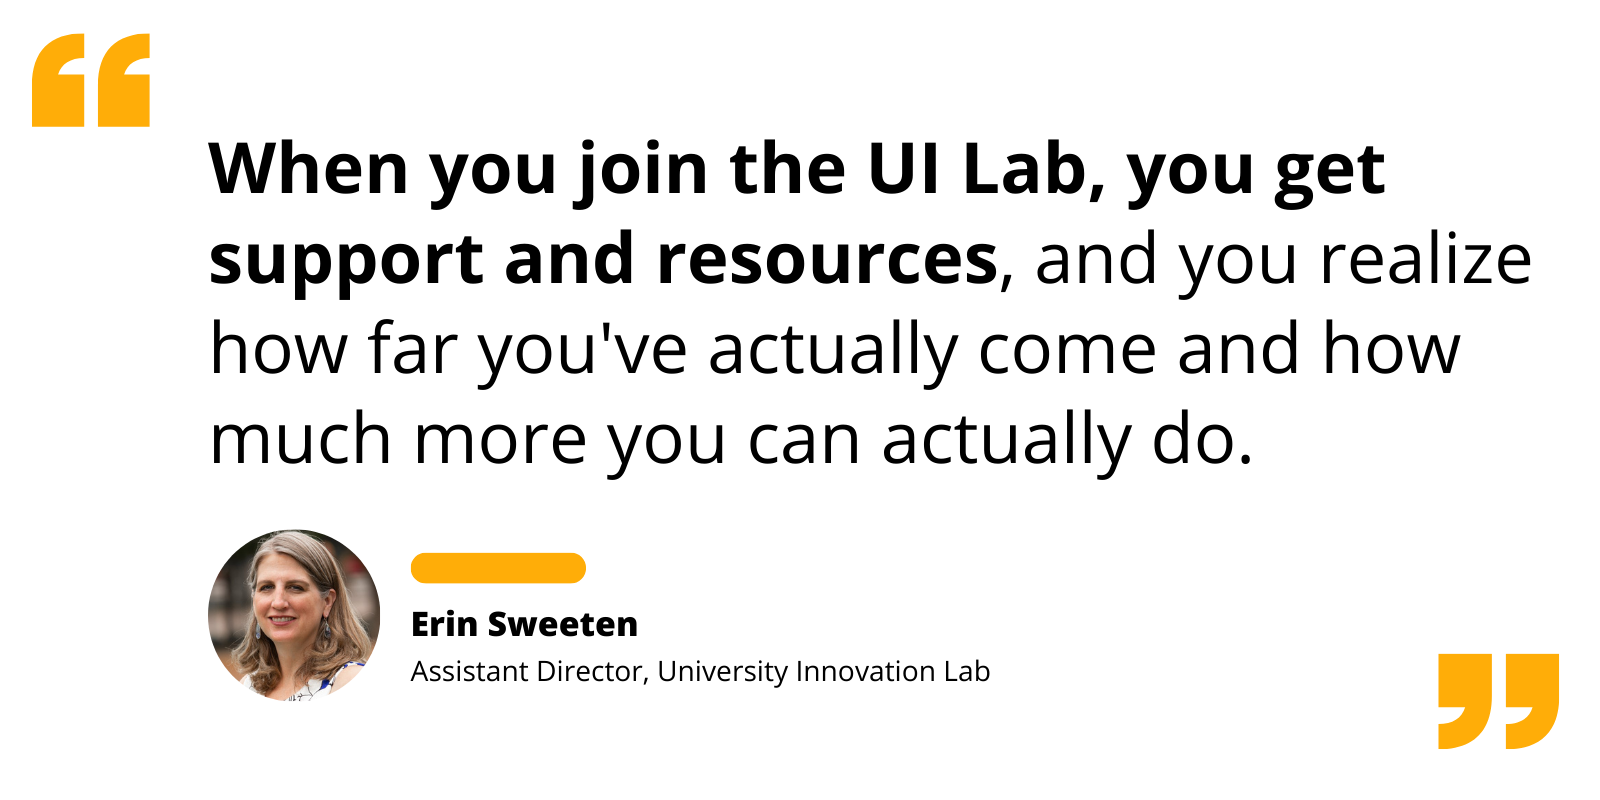 Quote from Erin Sweeten: “When you join the UI Lab, you get support and resources, and you realize how far you've actually come and how much more you can actually do.”